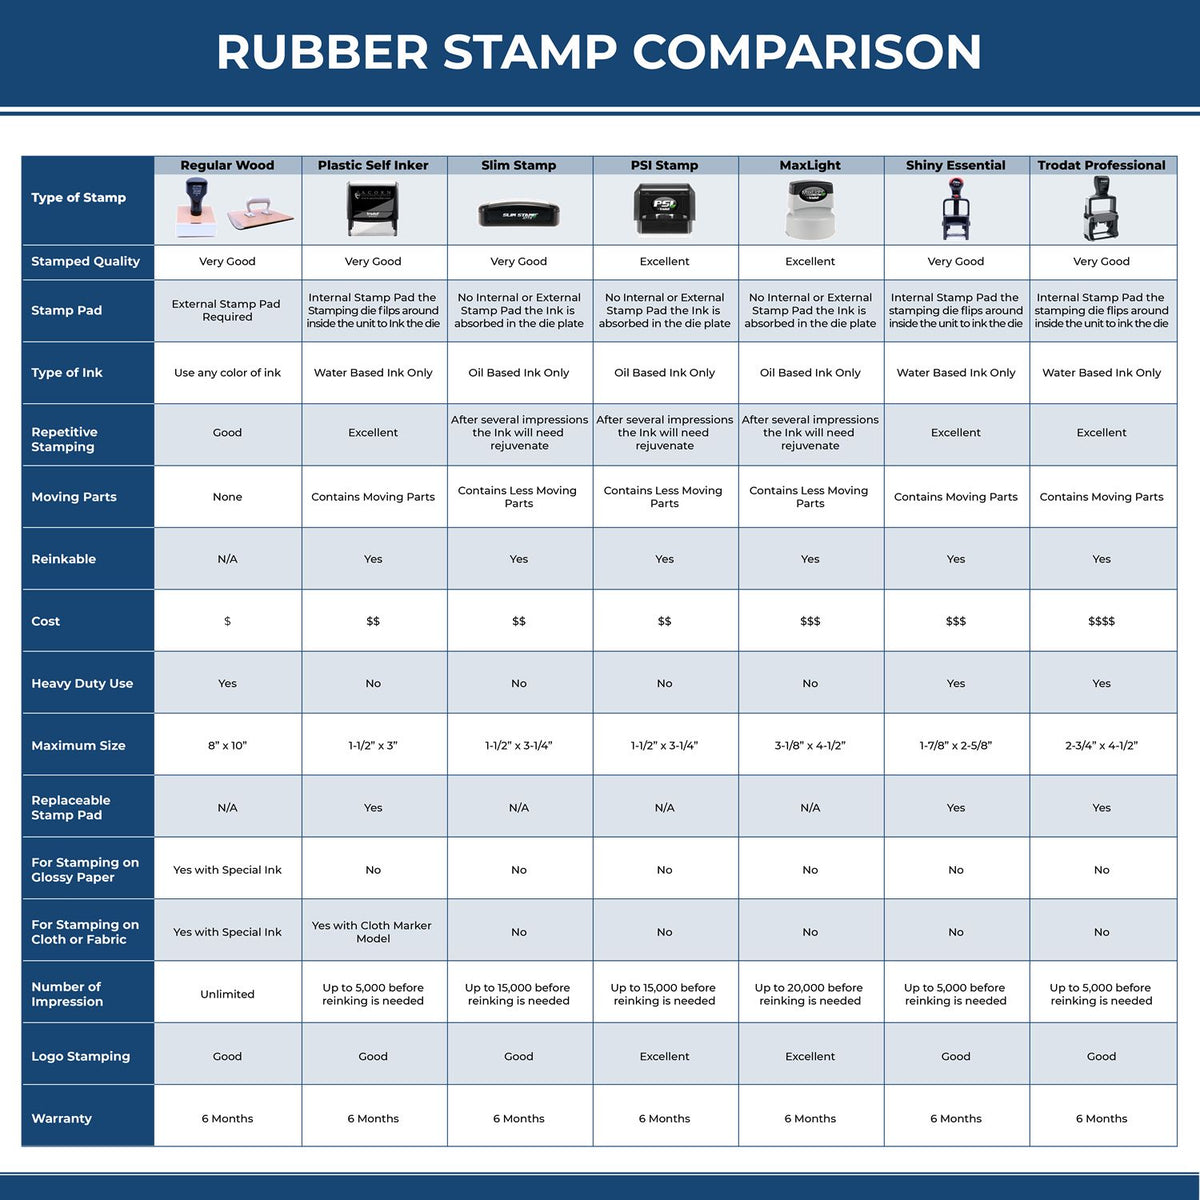 A comparison chart for the different types of mount models available for the Premium MaxLight Pre-Inked Vermont Landscape Architectural Stamp.